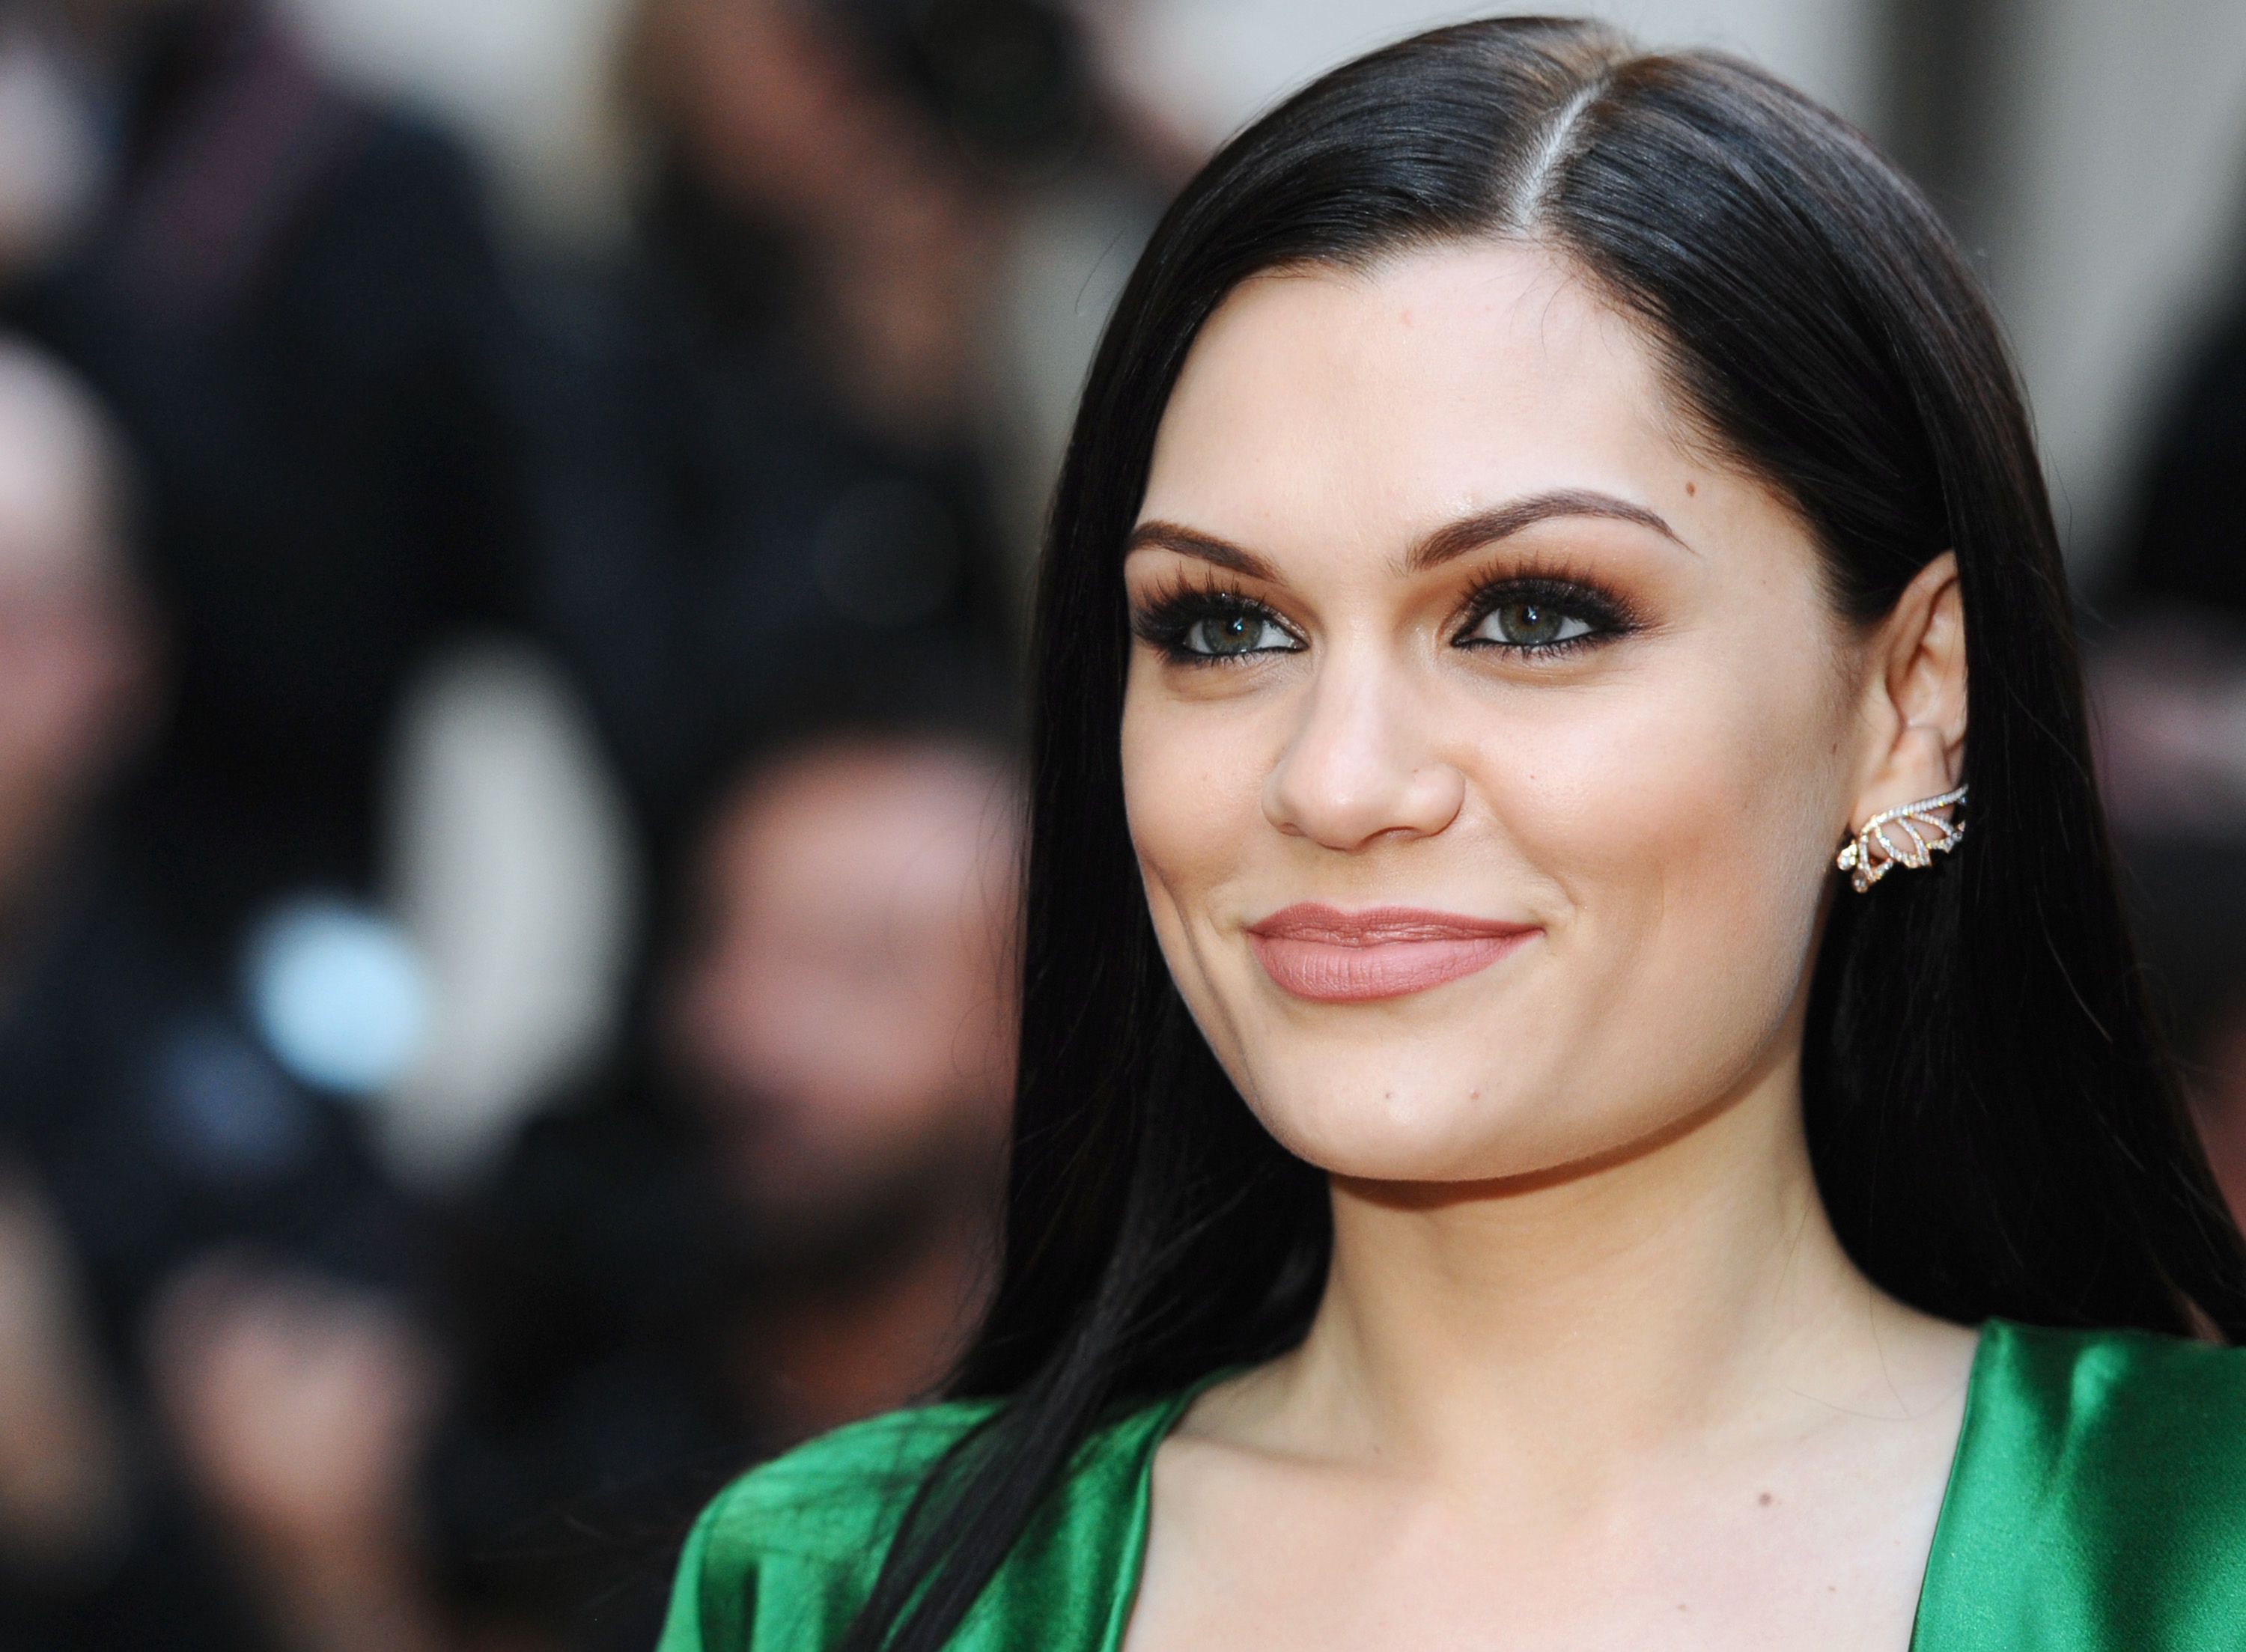 Singer Jessie J Biography and Profile